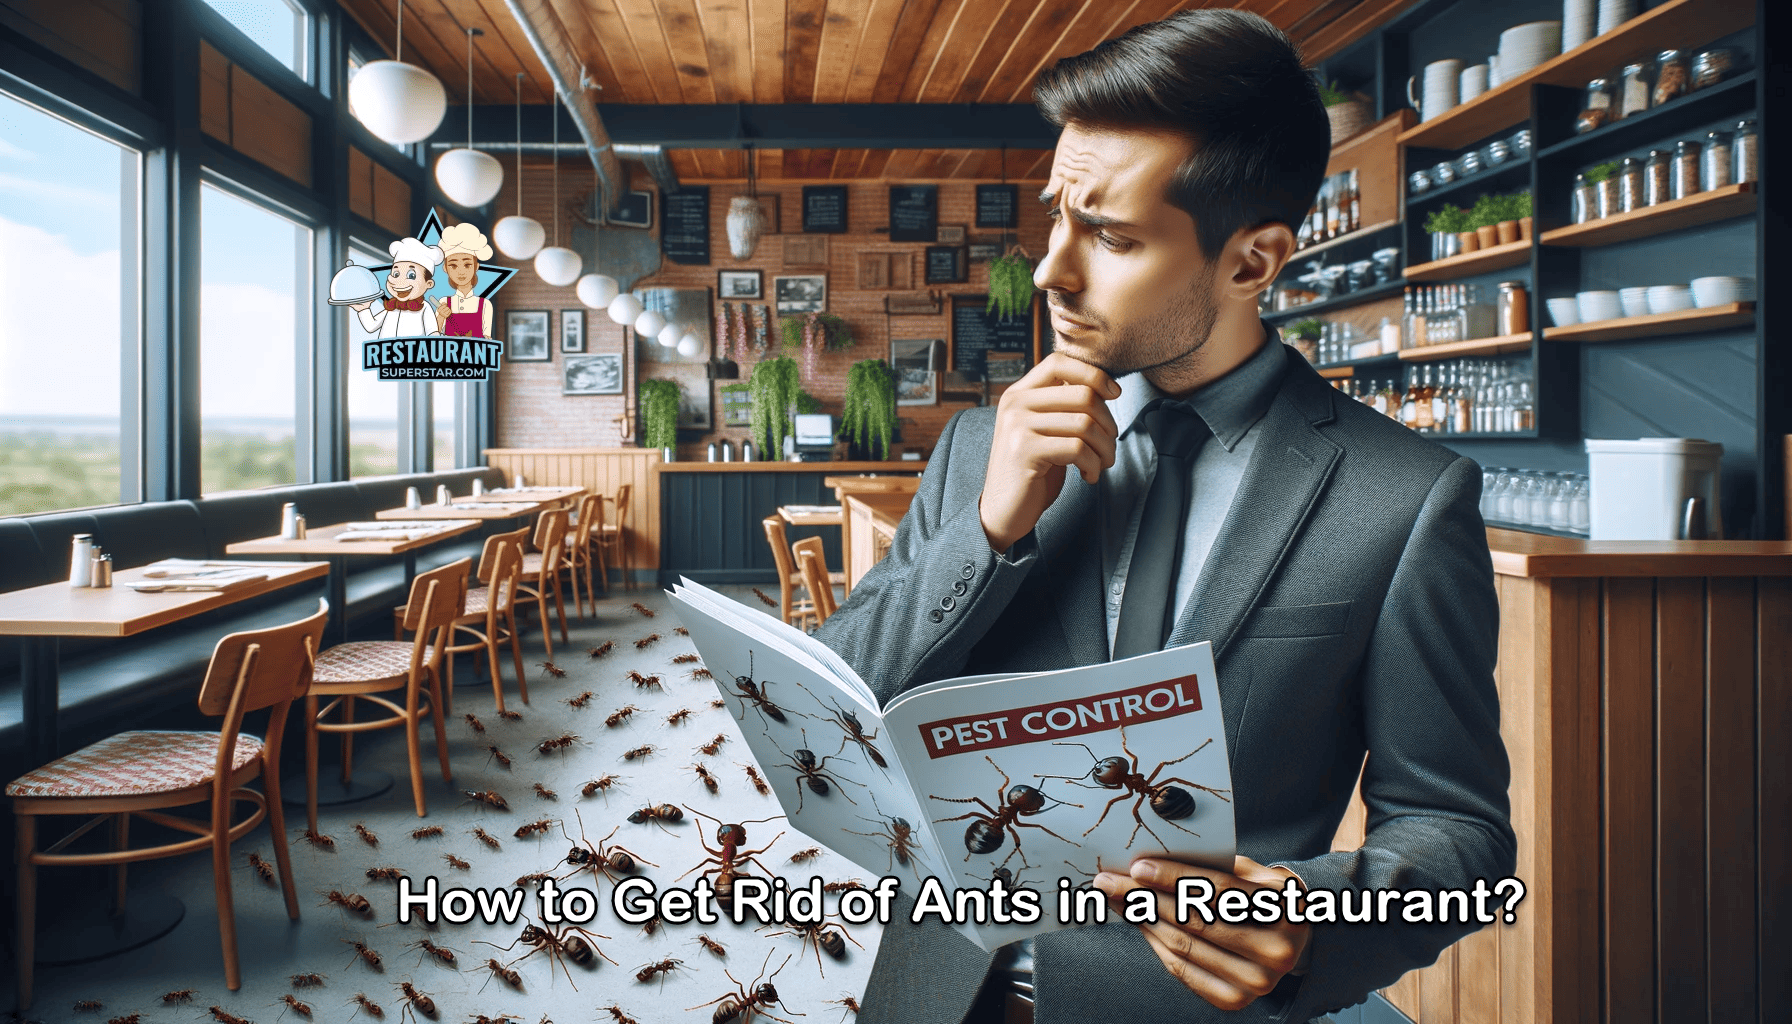 How to Get Rid of Ants in a Restaurant